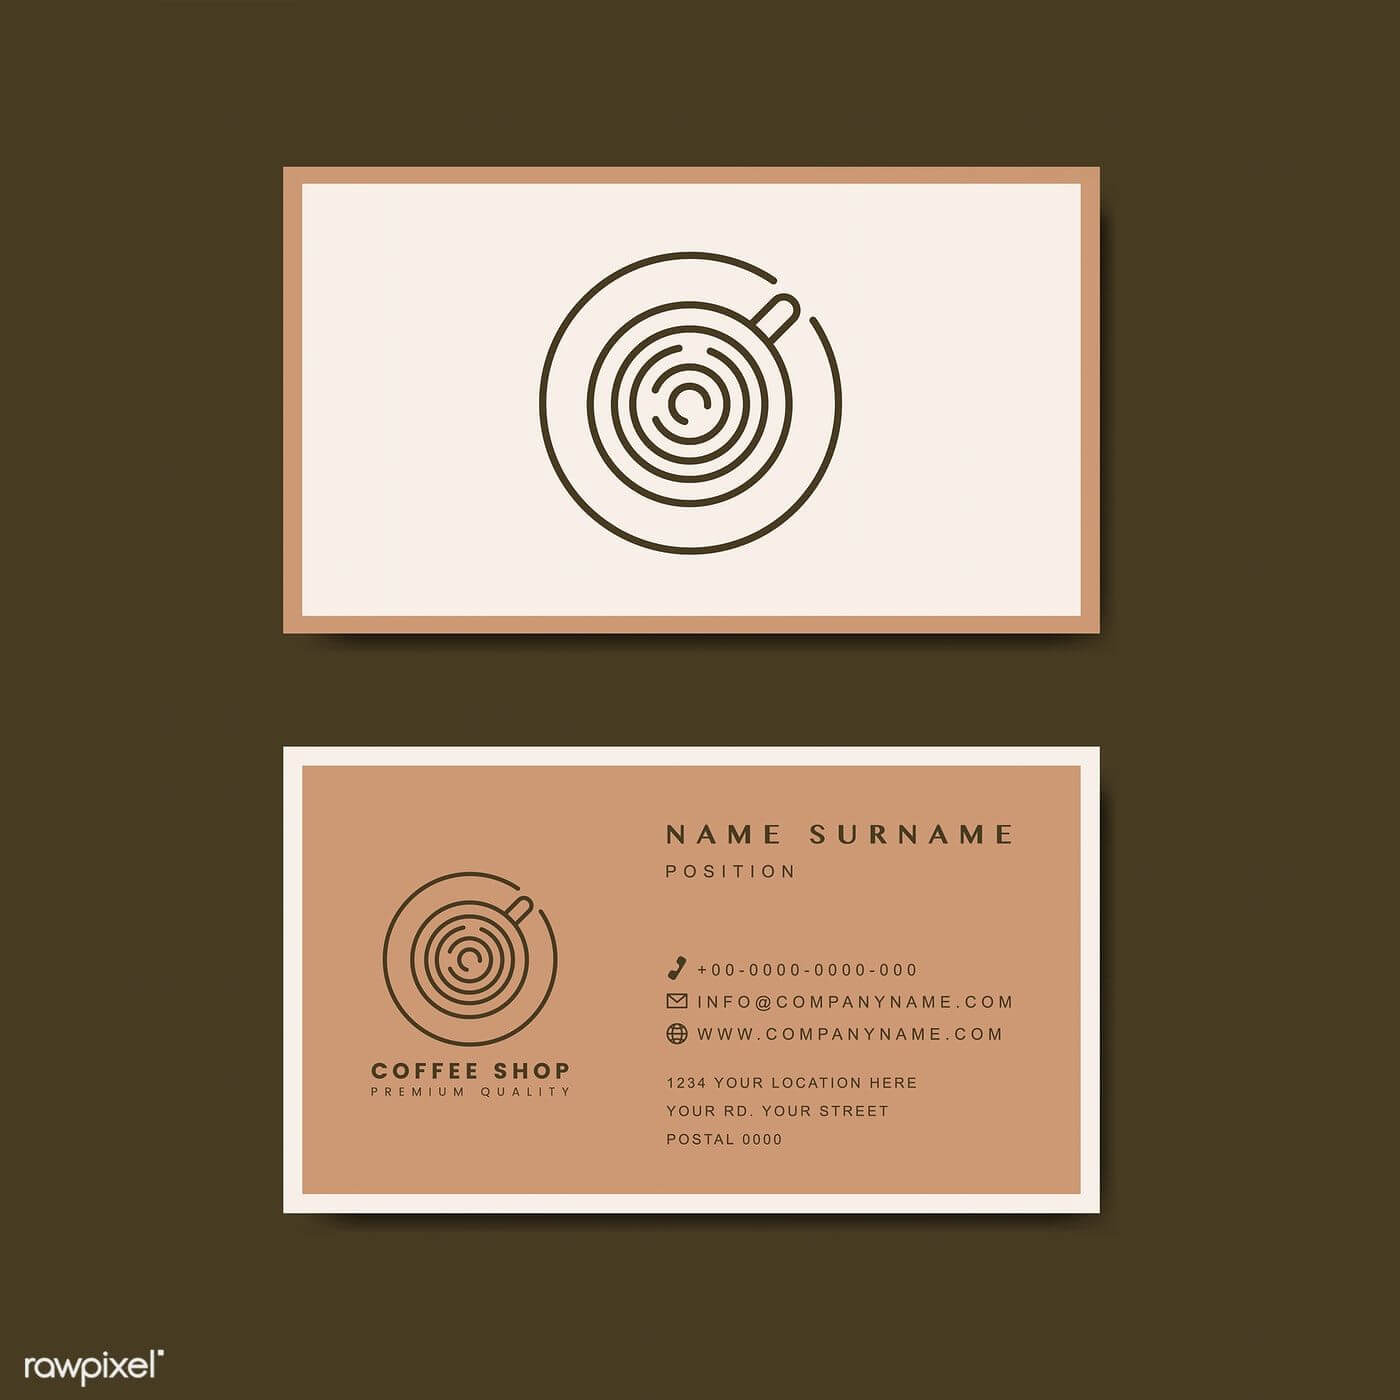 Coffee Shop Business Card Template Vector | Free Image In Coffee Business Card Template Free